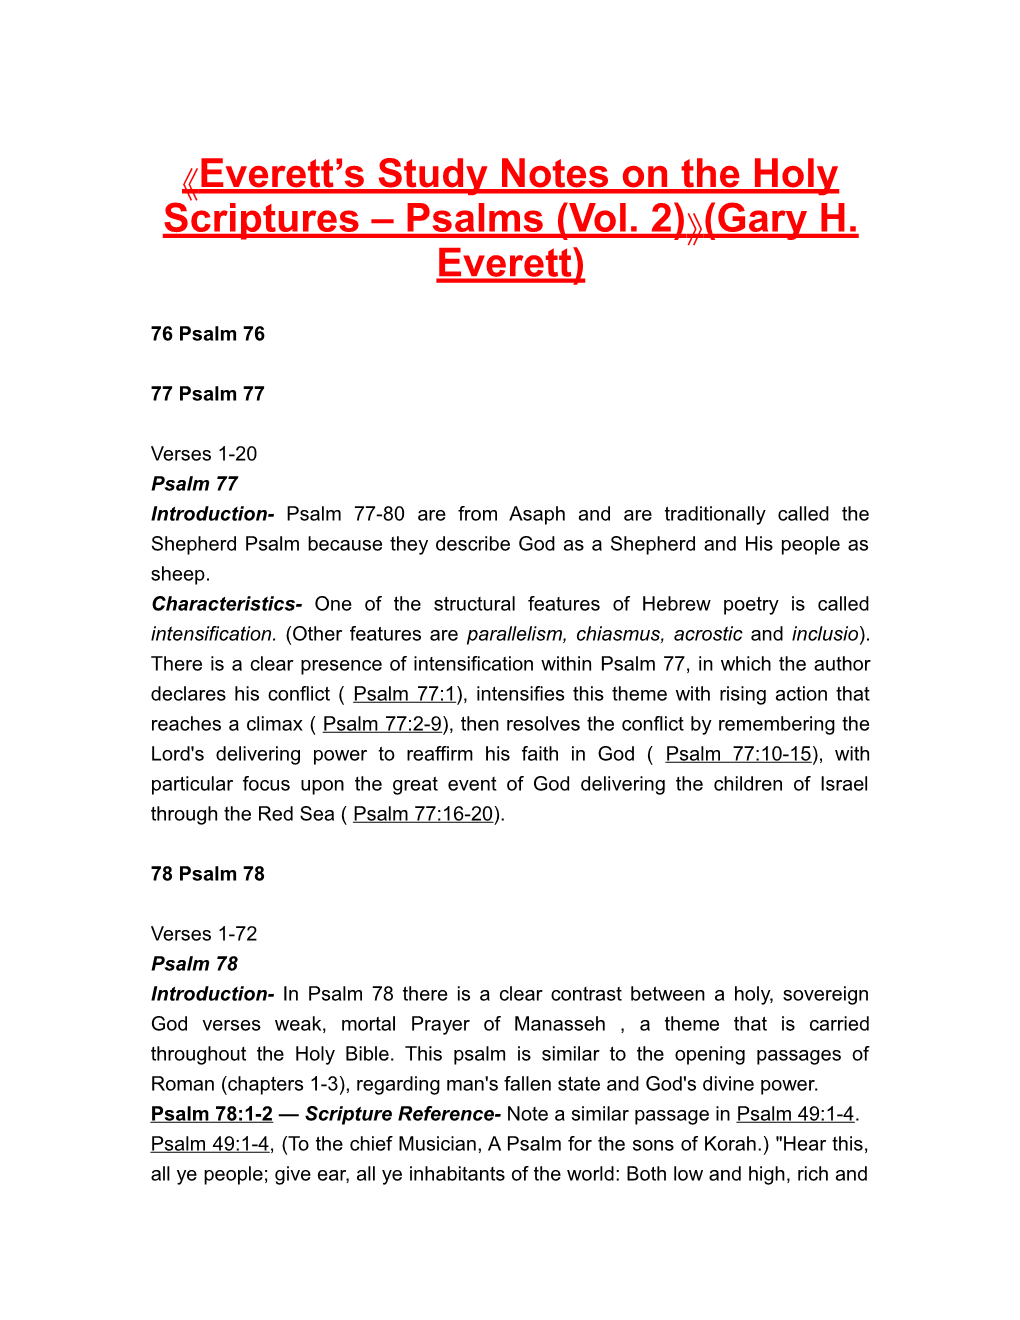 Everett S Study Notes on the Holy Scriptures Psalms (Vol. 2) (Gary H. Everett)